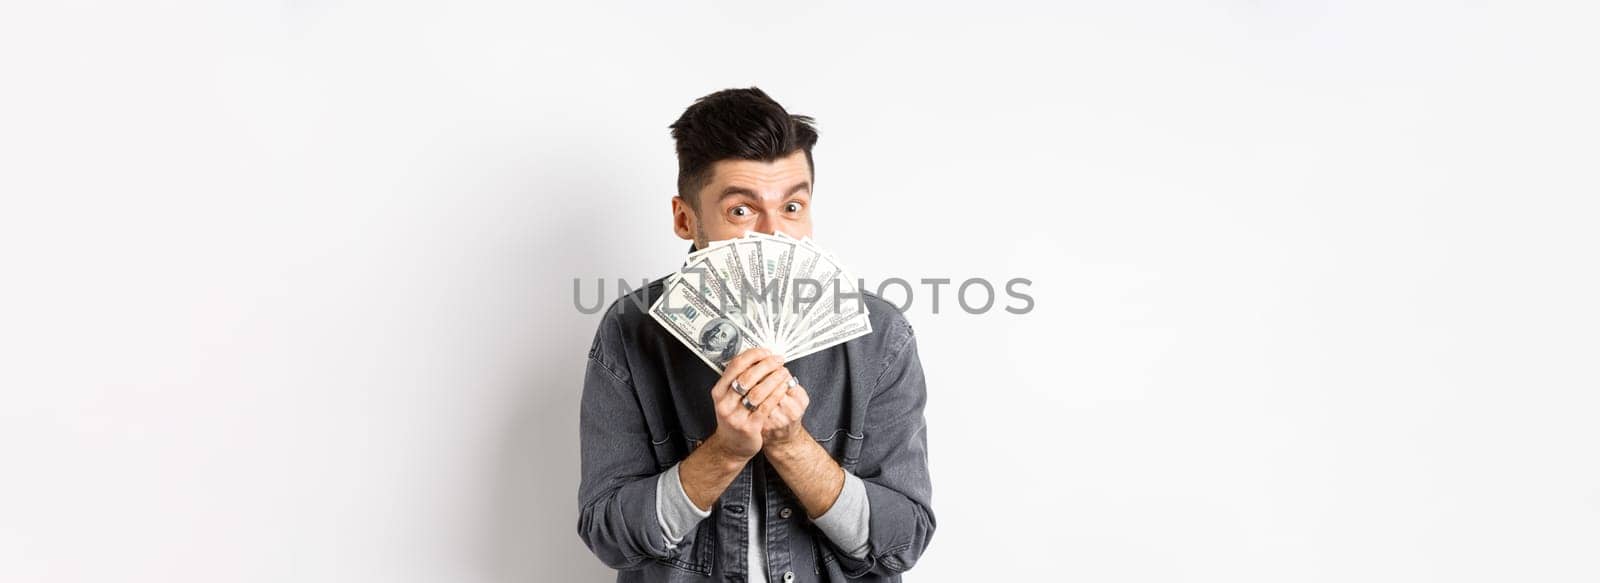 Excited funny guy hiding face behind dollar bills and smiling, showing money in cash, standing against white background.